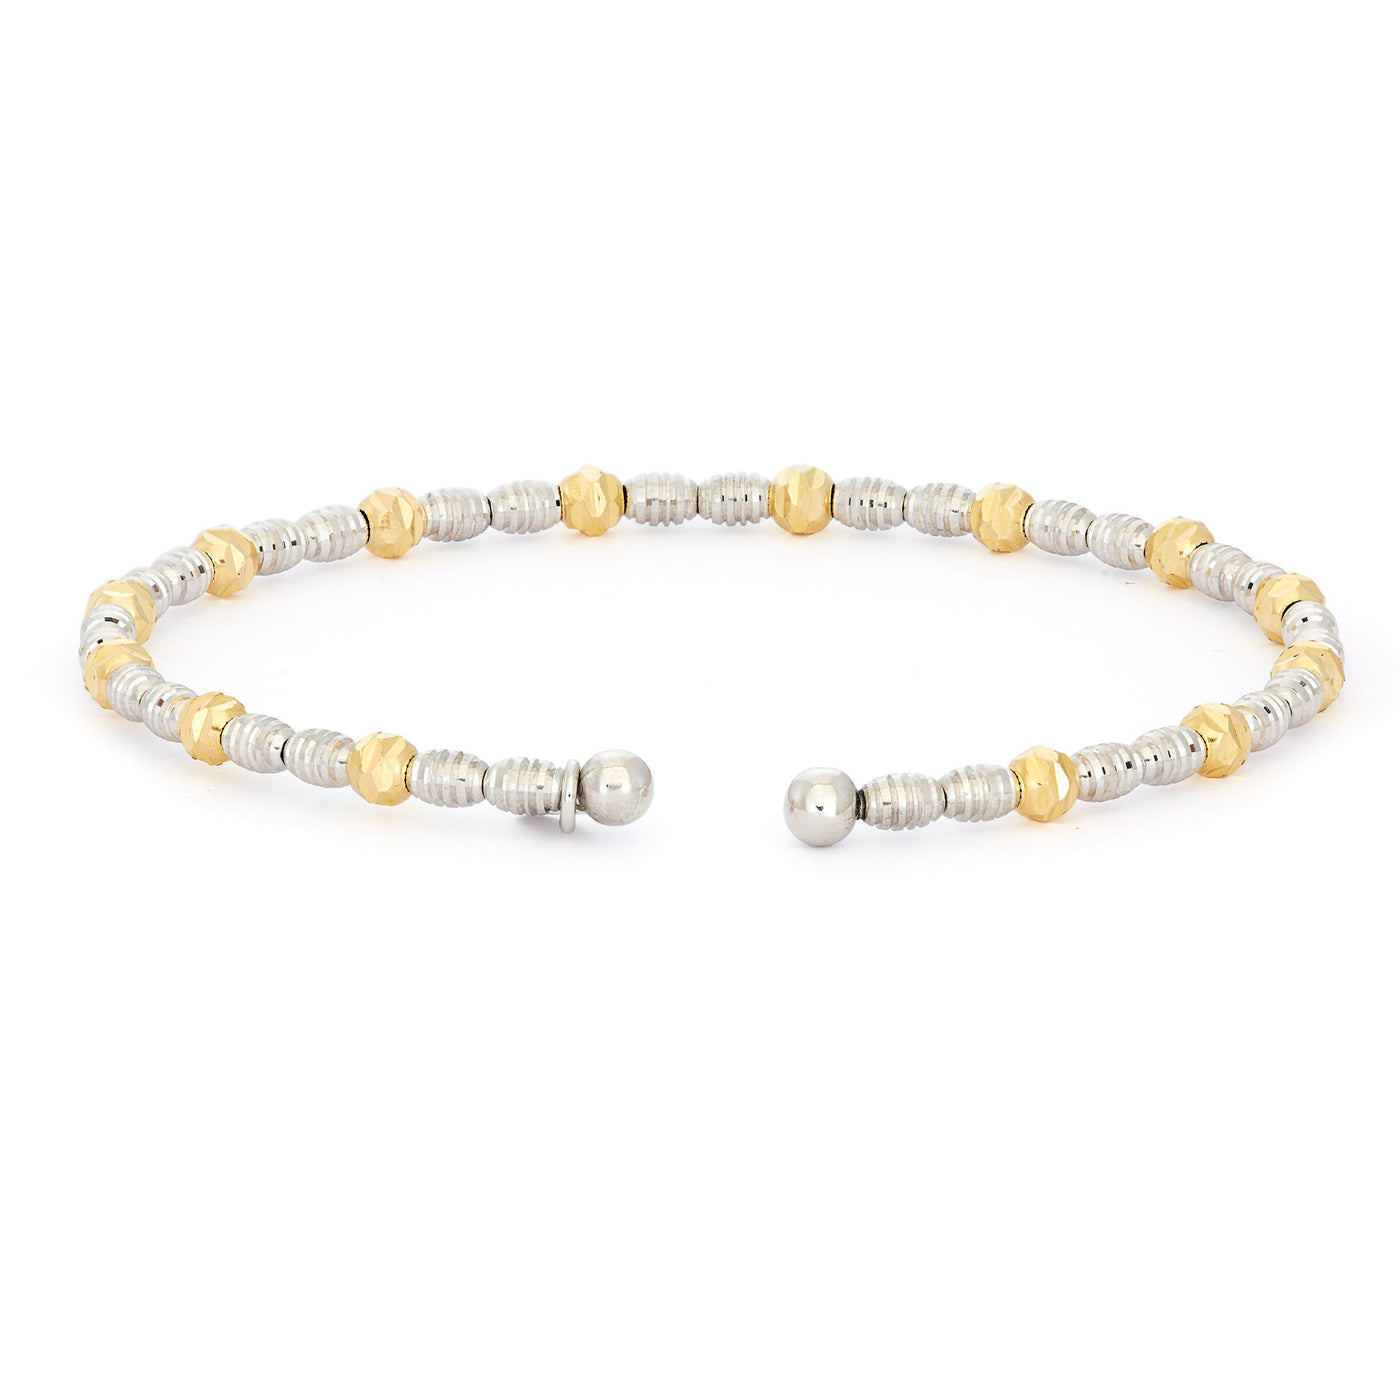 Rebecca Sloane Two-Tone Silver Bangle with Oval and Round Beads